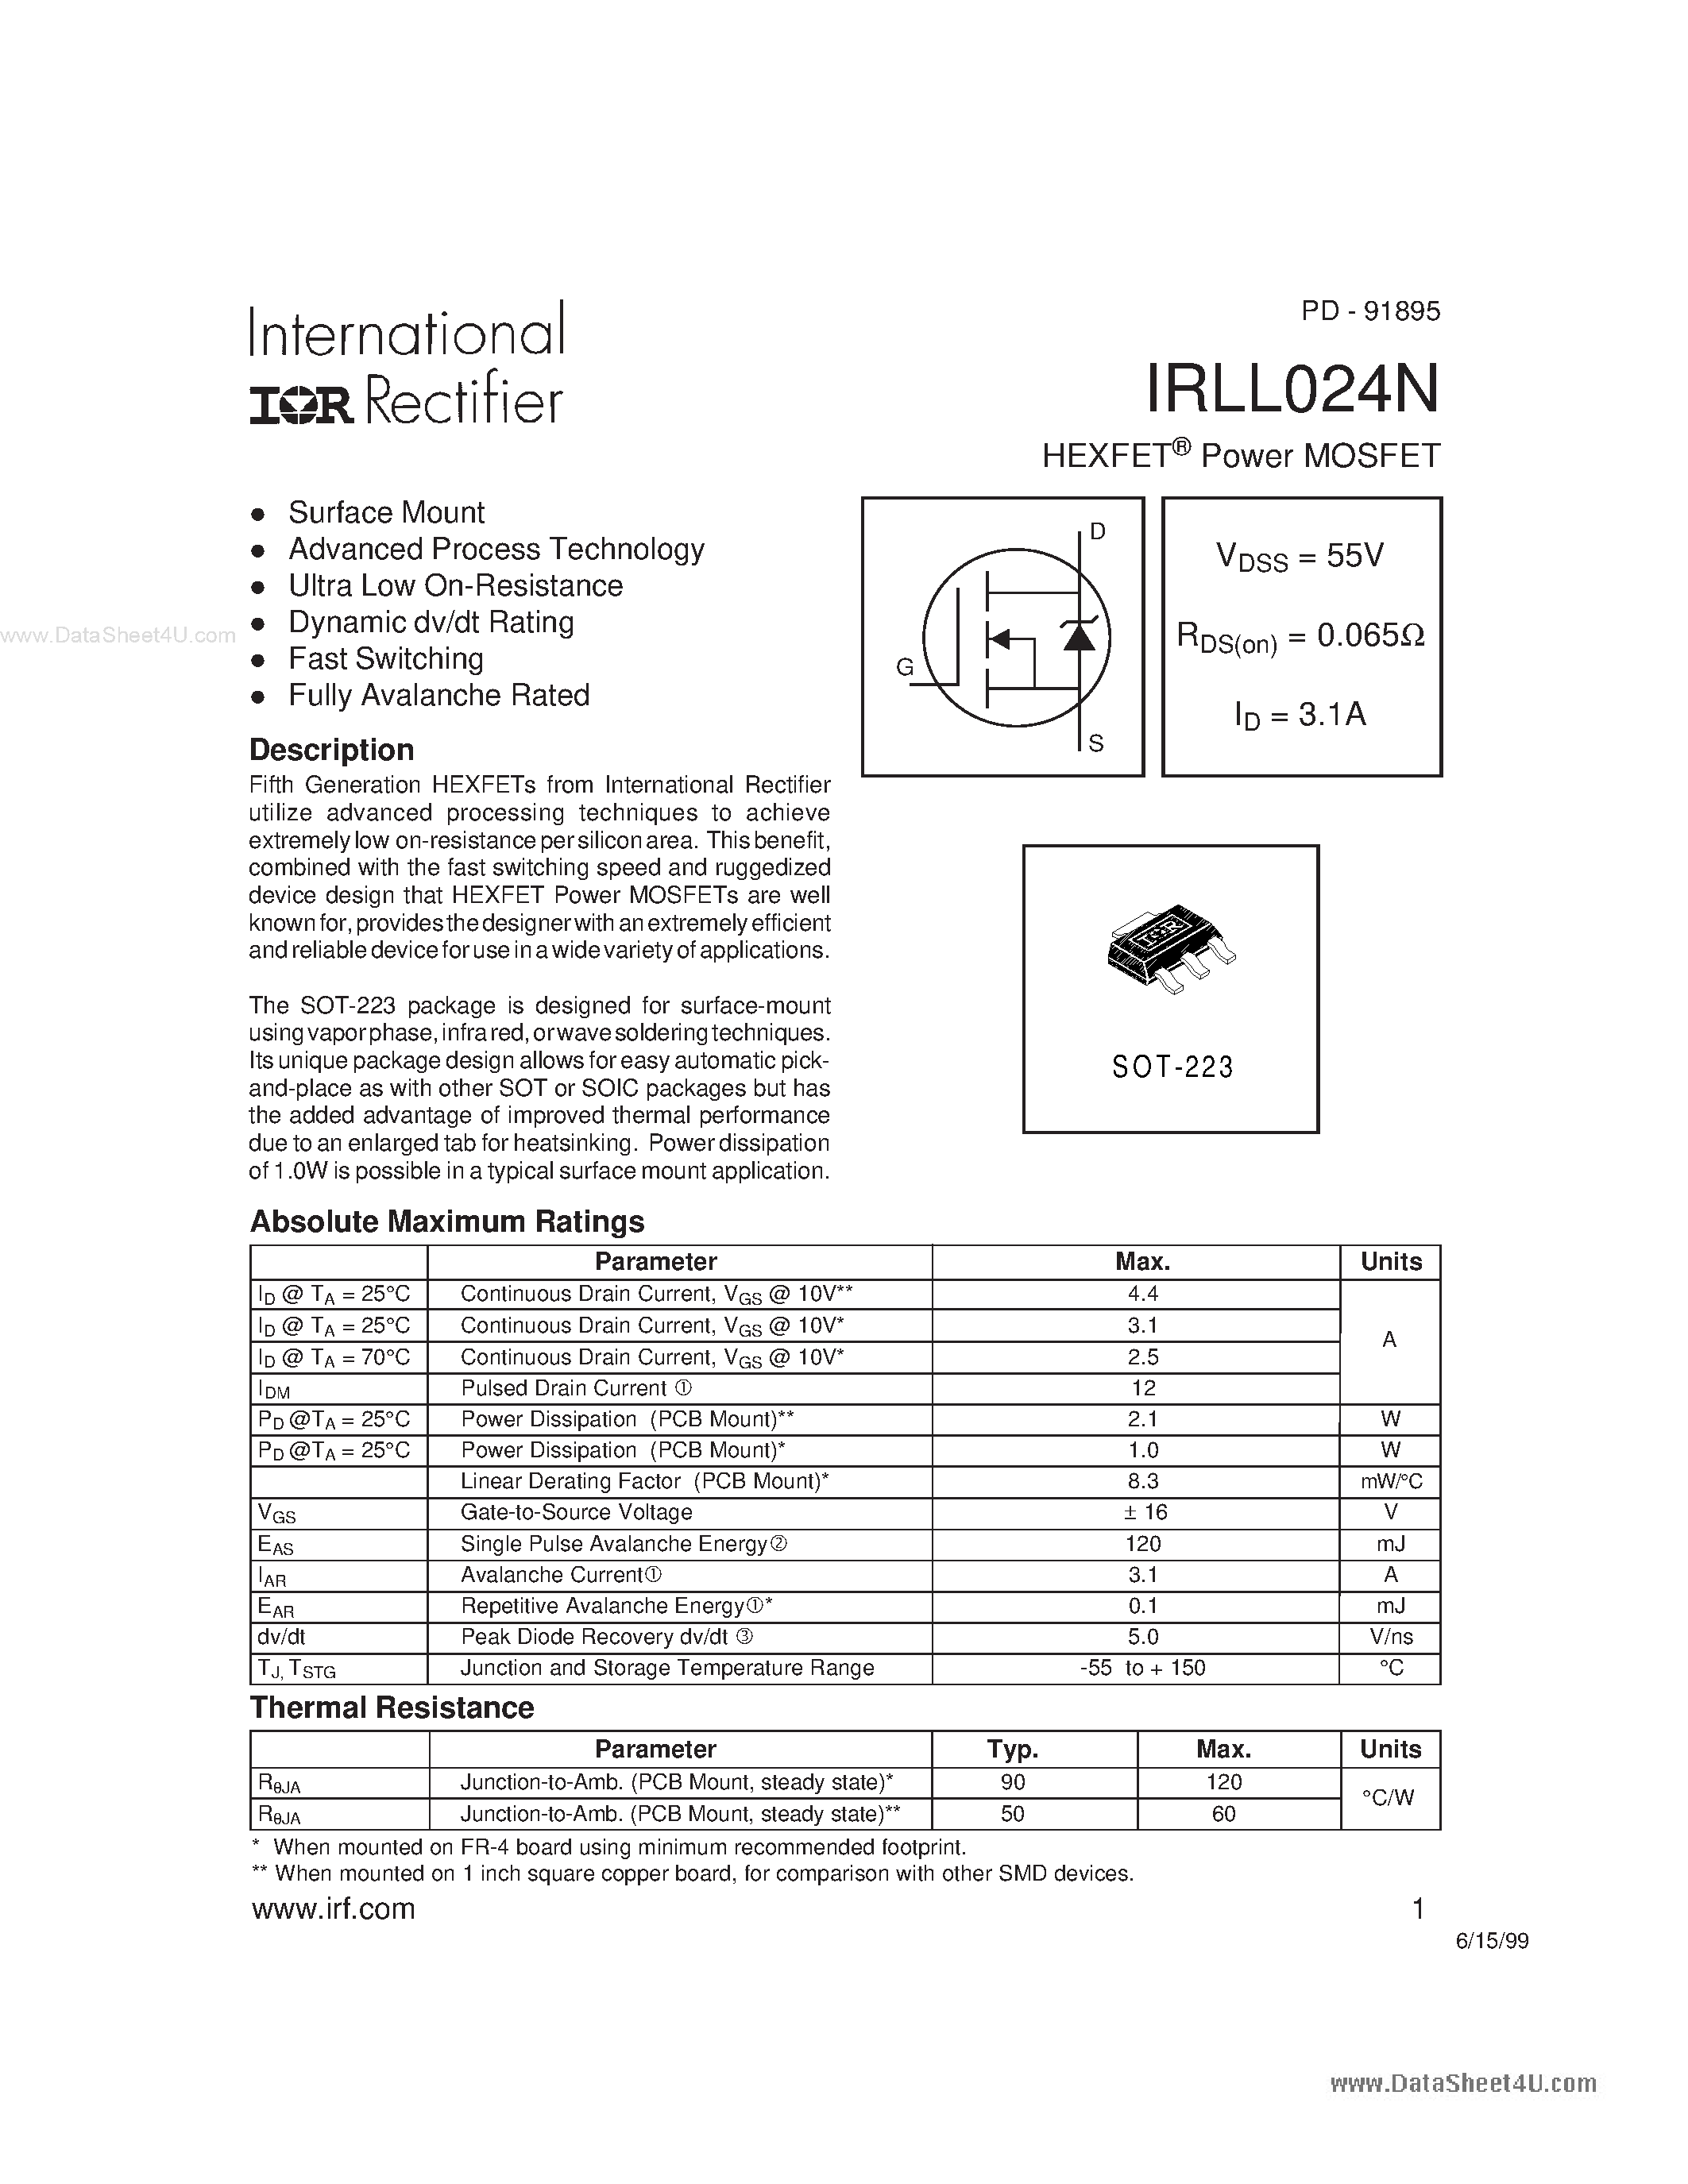 Datasheet LL024N - Search -----> IRLL024N page 1